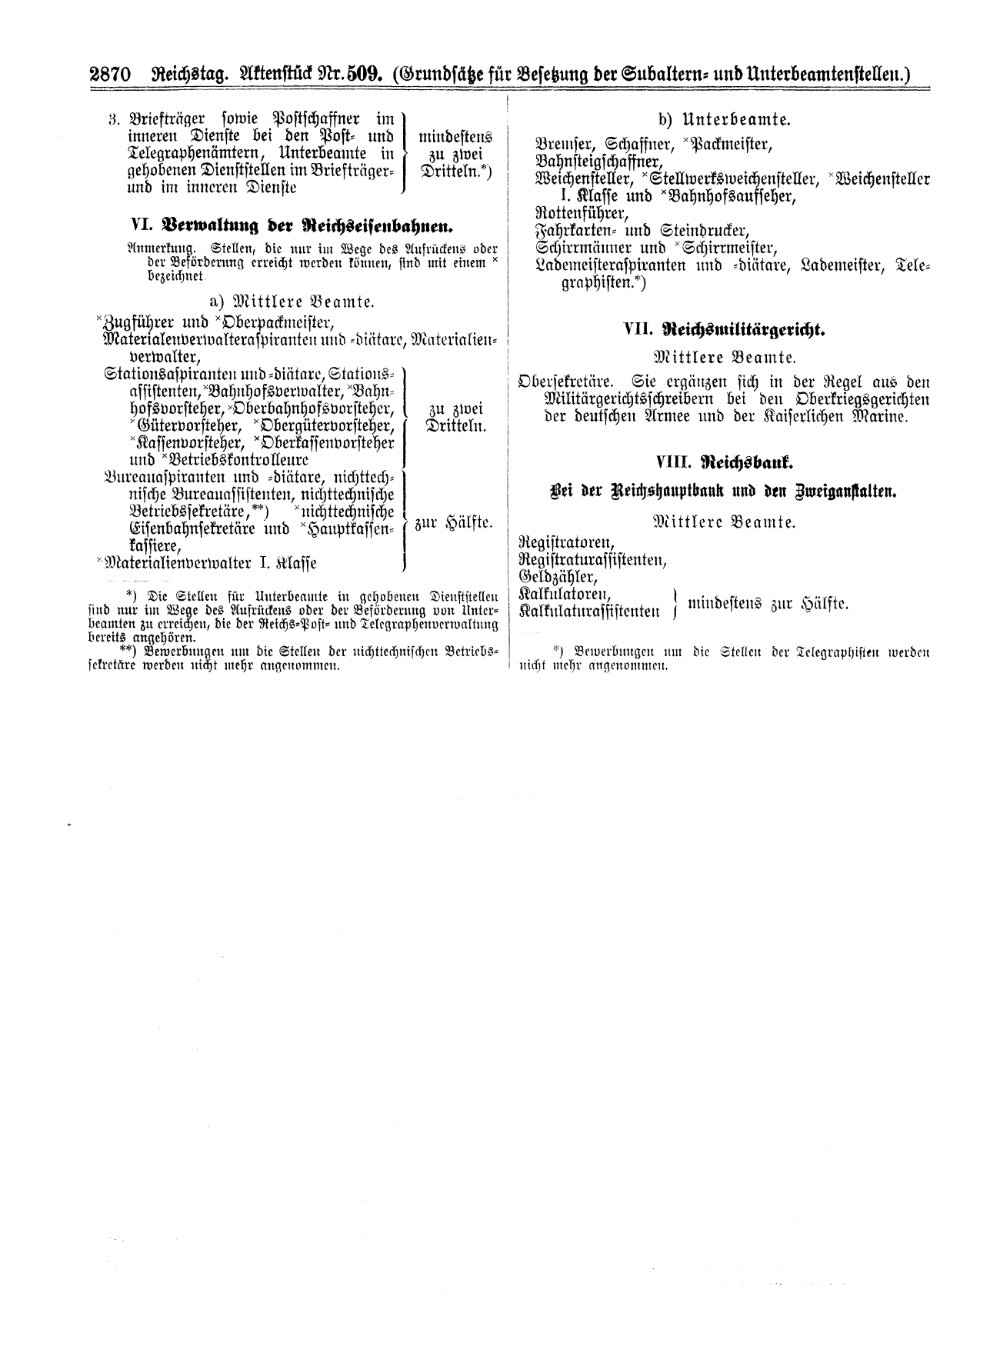 Scan of page 2870